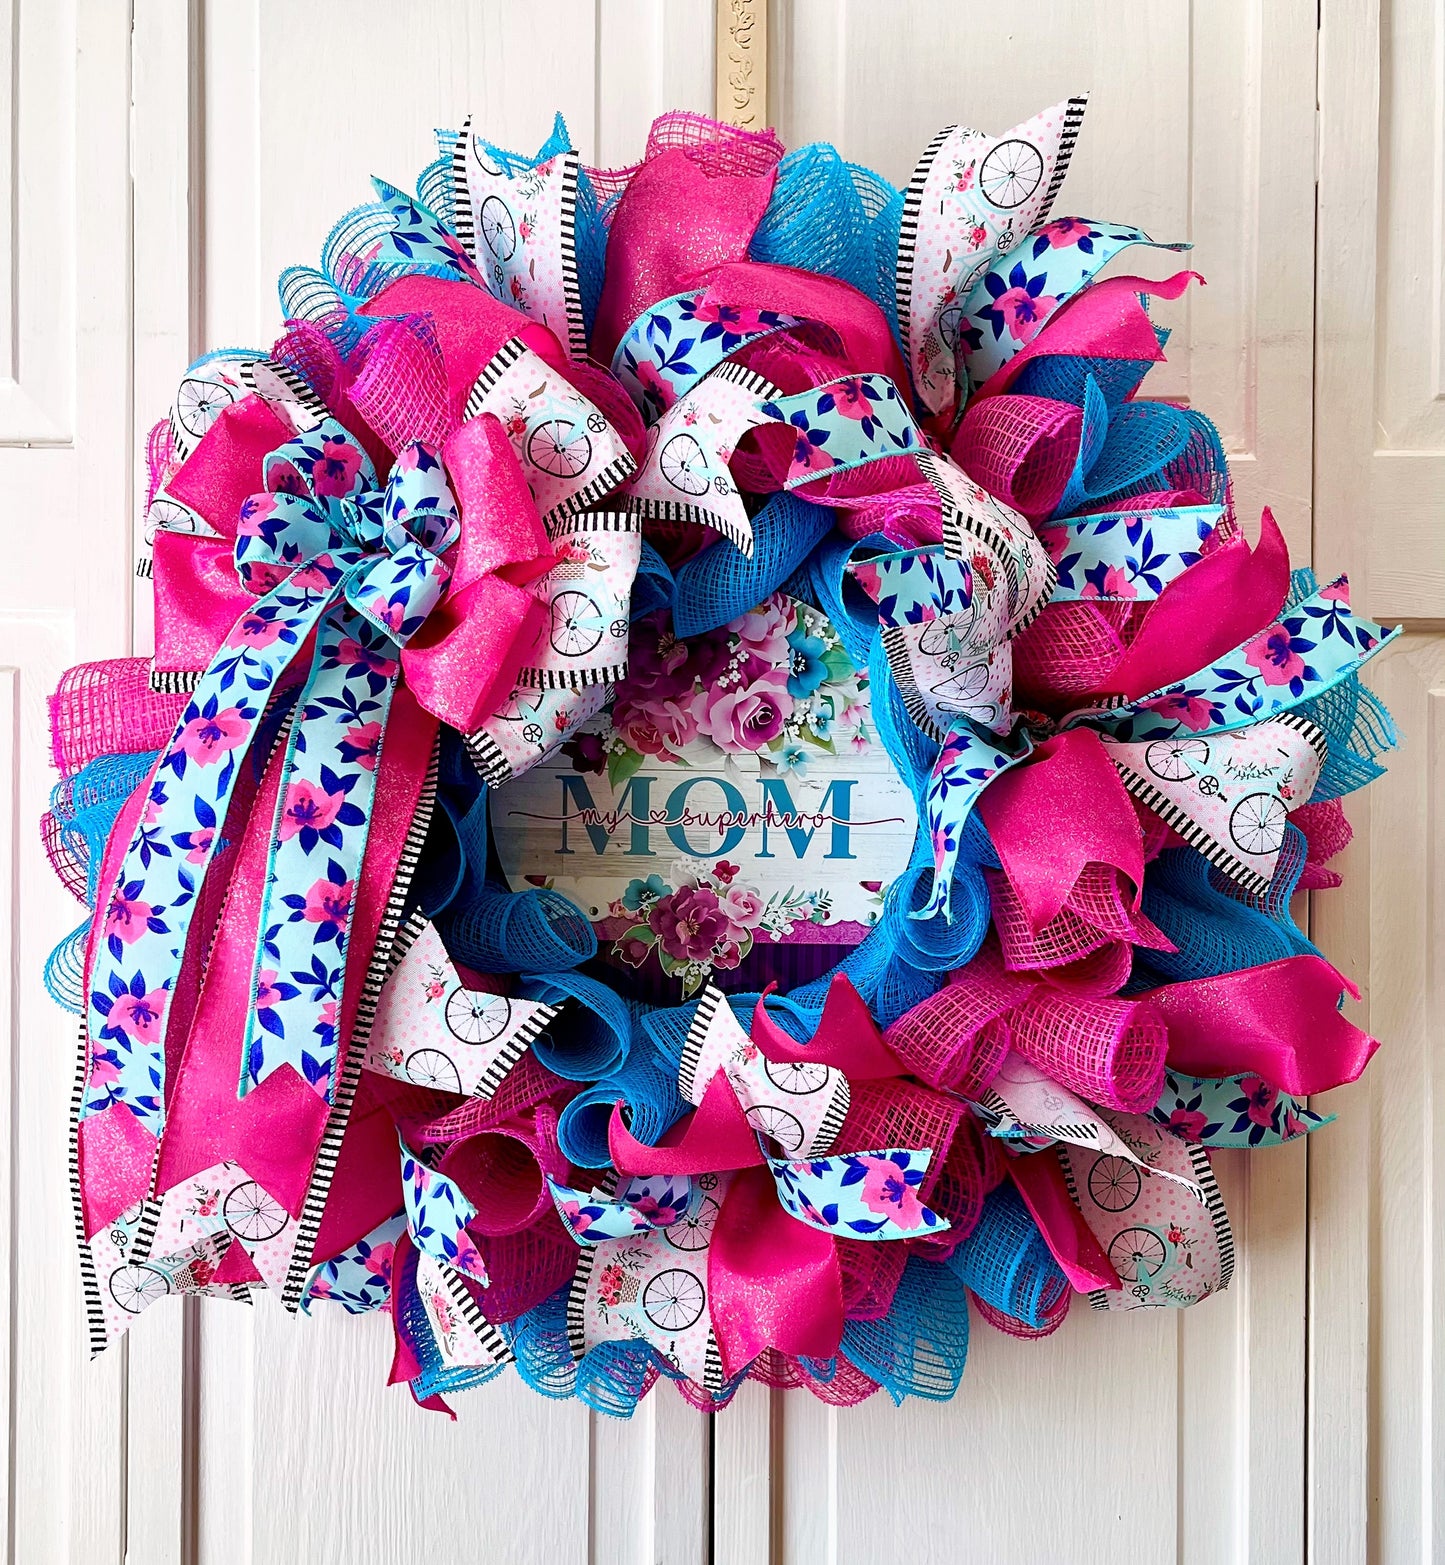 Spring and  Summer 24" Fabric Mesh Wreaths